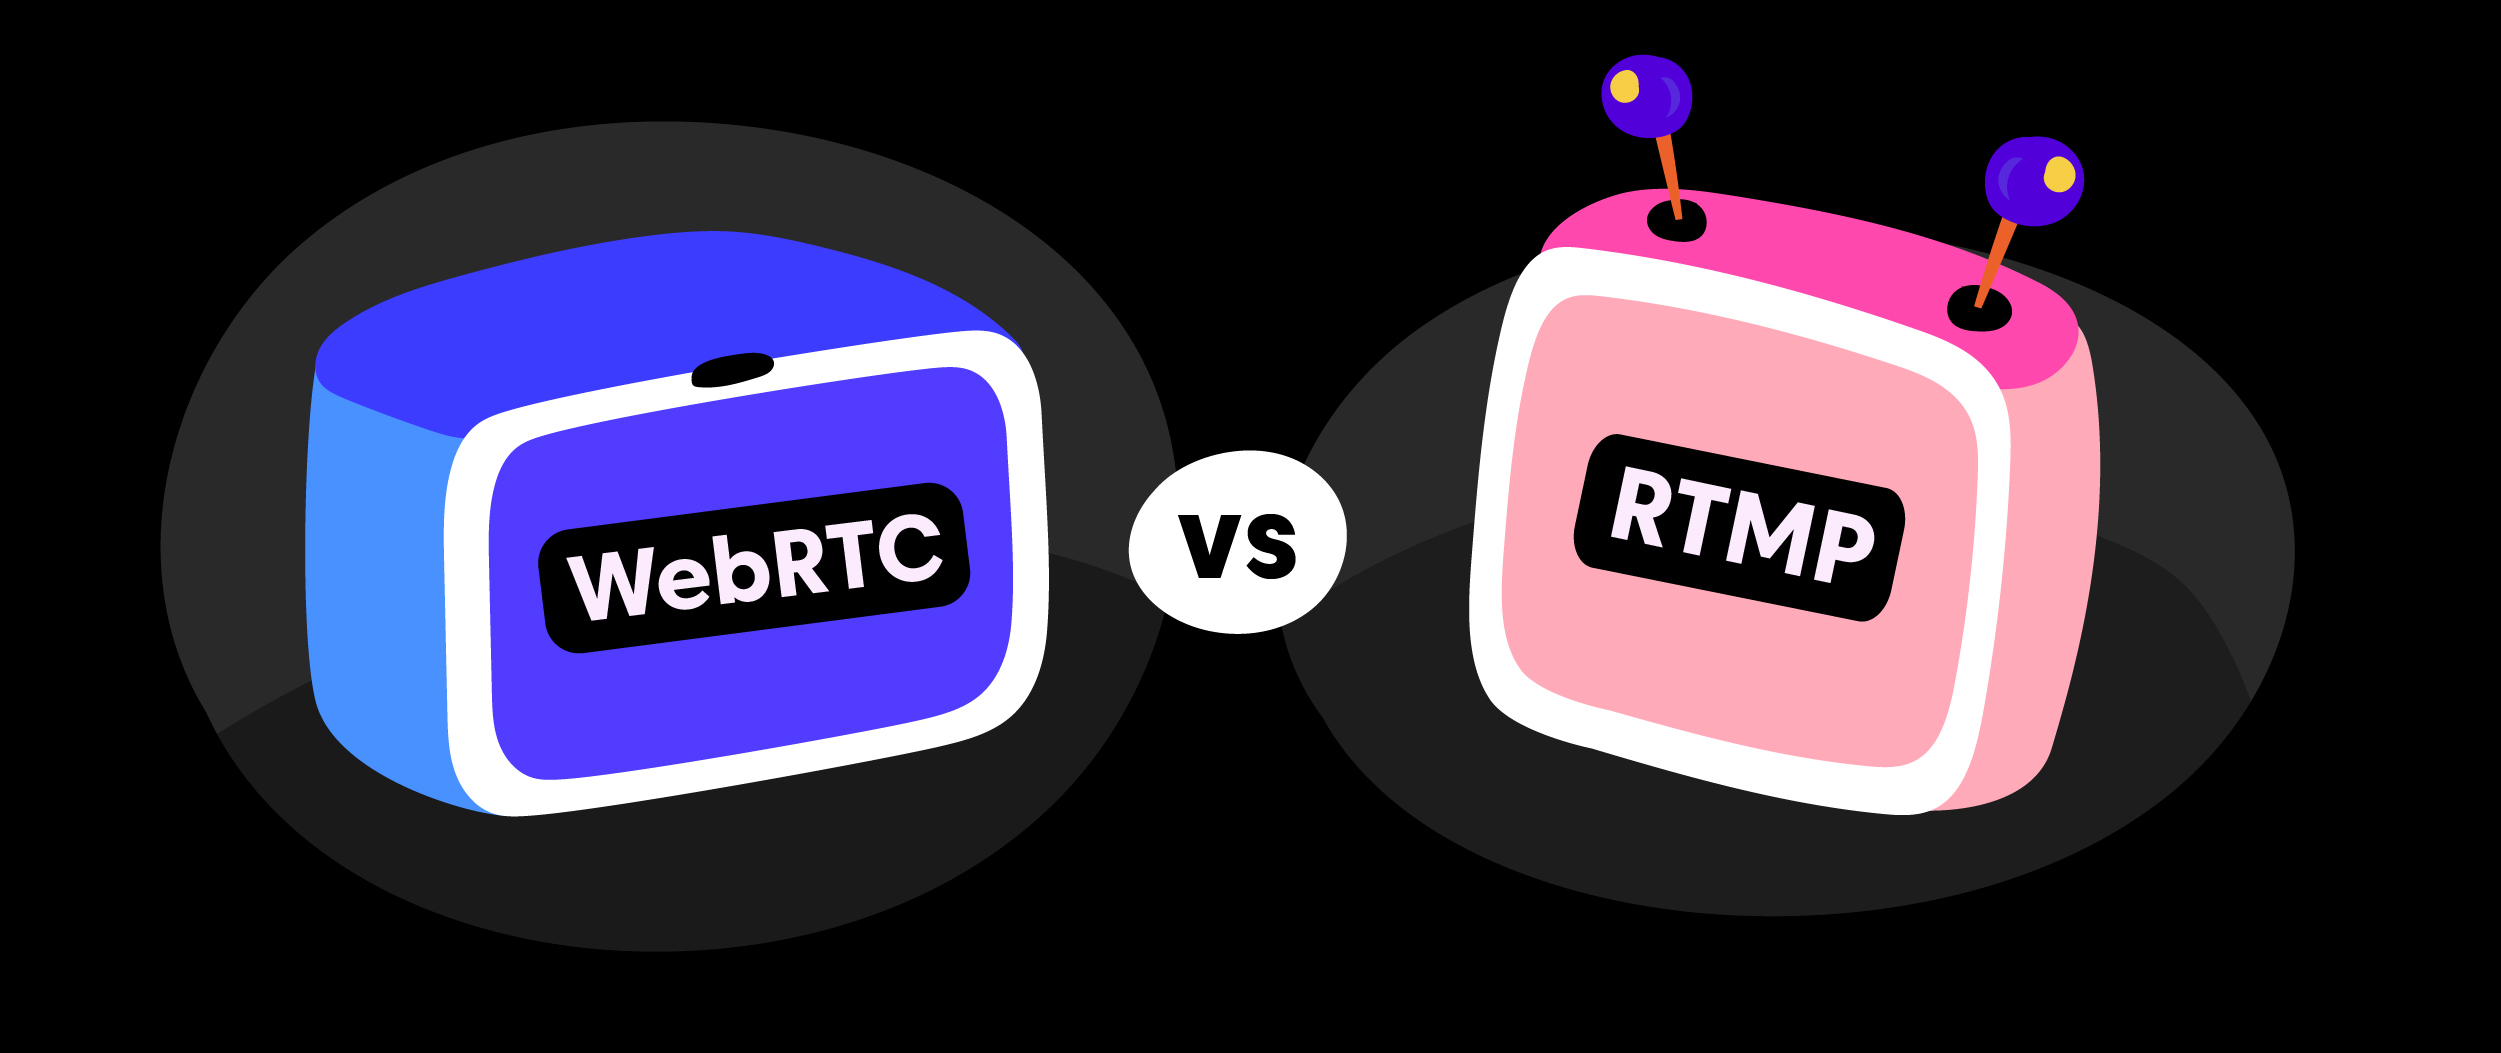 WebRTC vs. RTMP: Which Protocol is Best for Streaming?